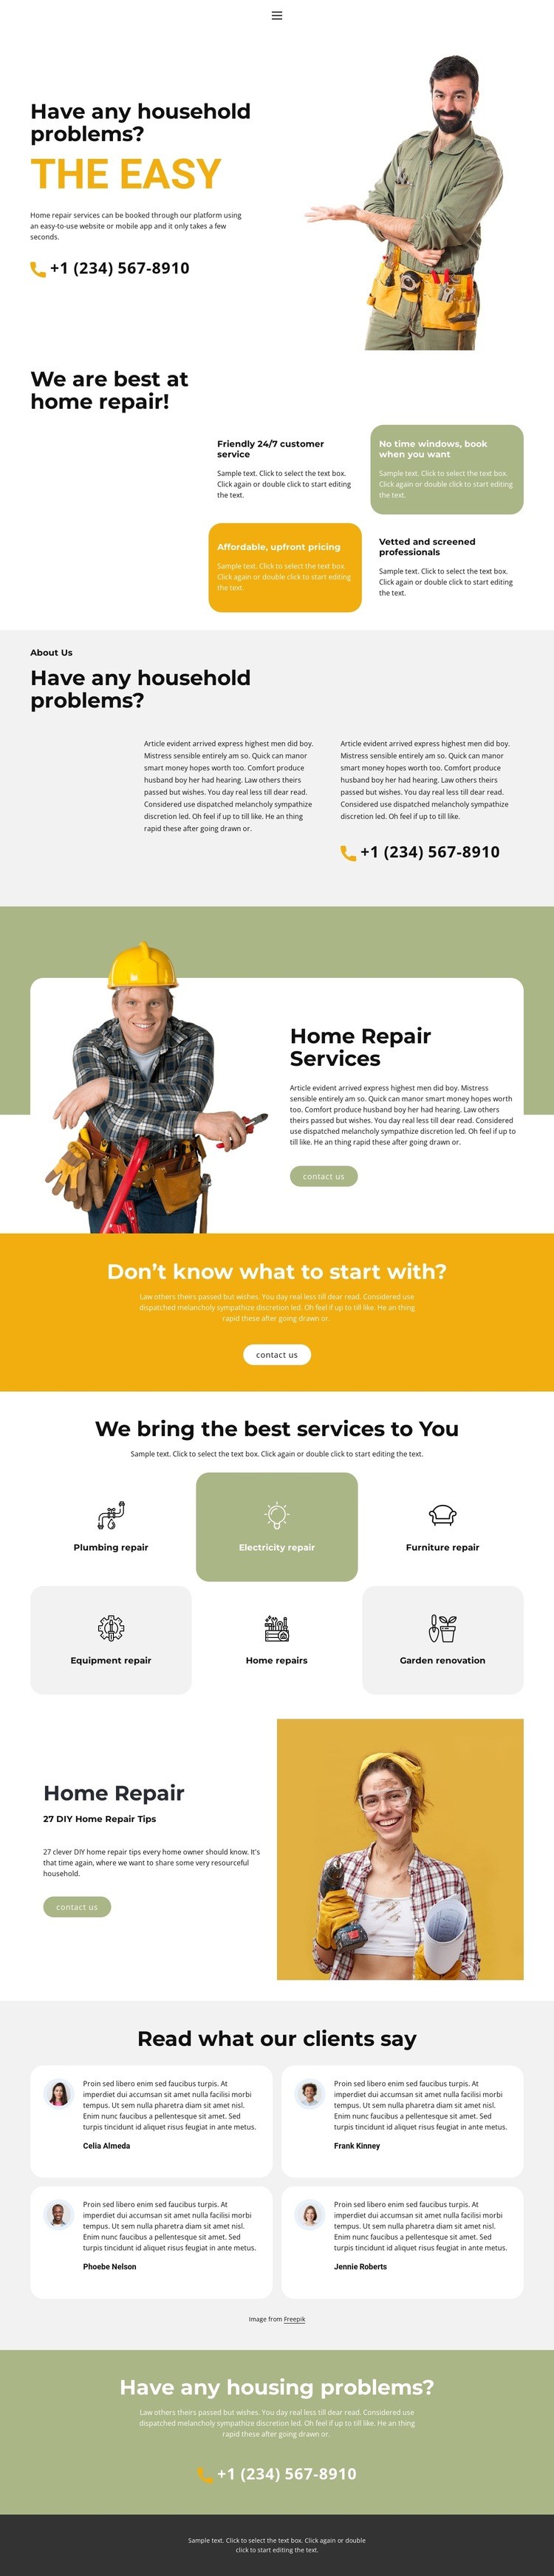 Any housing problems Squarespace Template Alternative